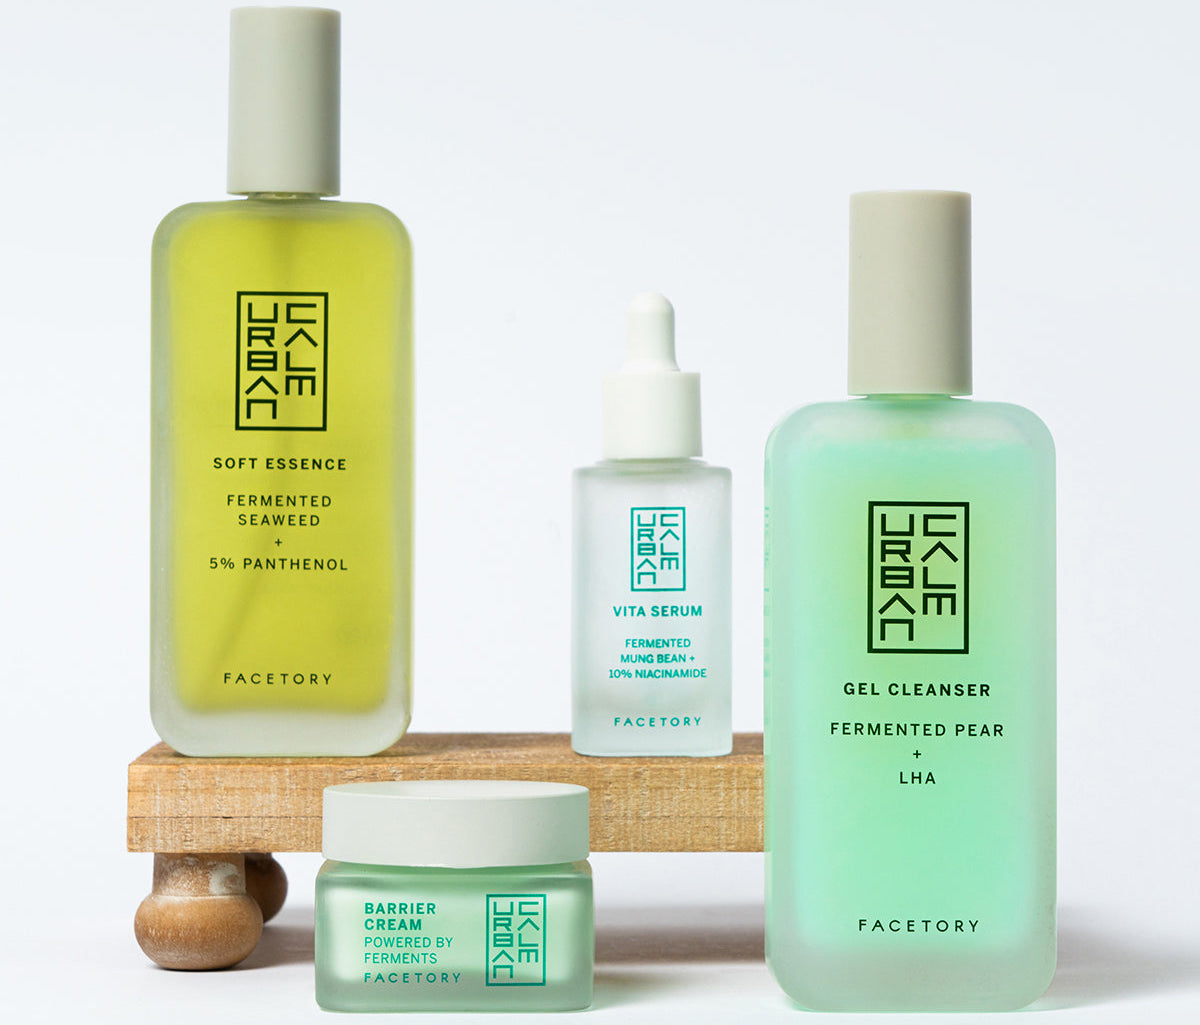 FaceTory Urban Calm Skincare products